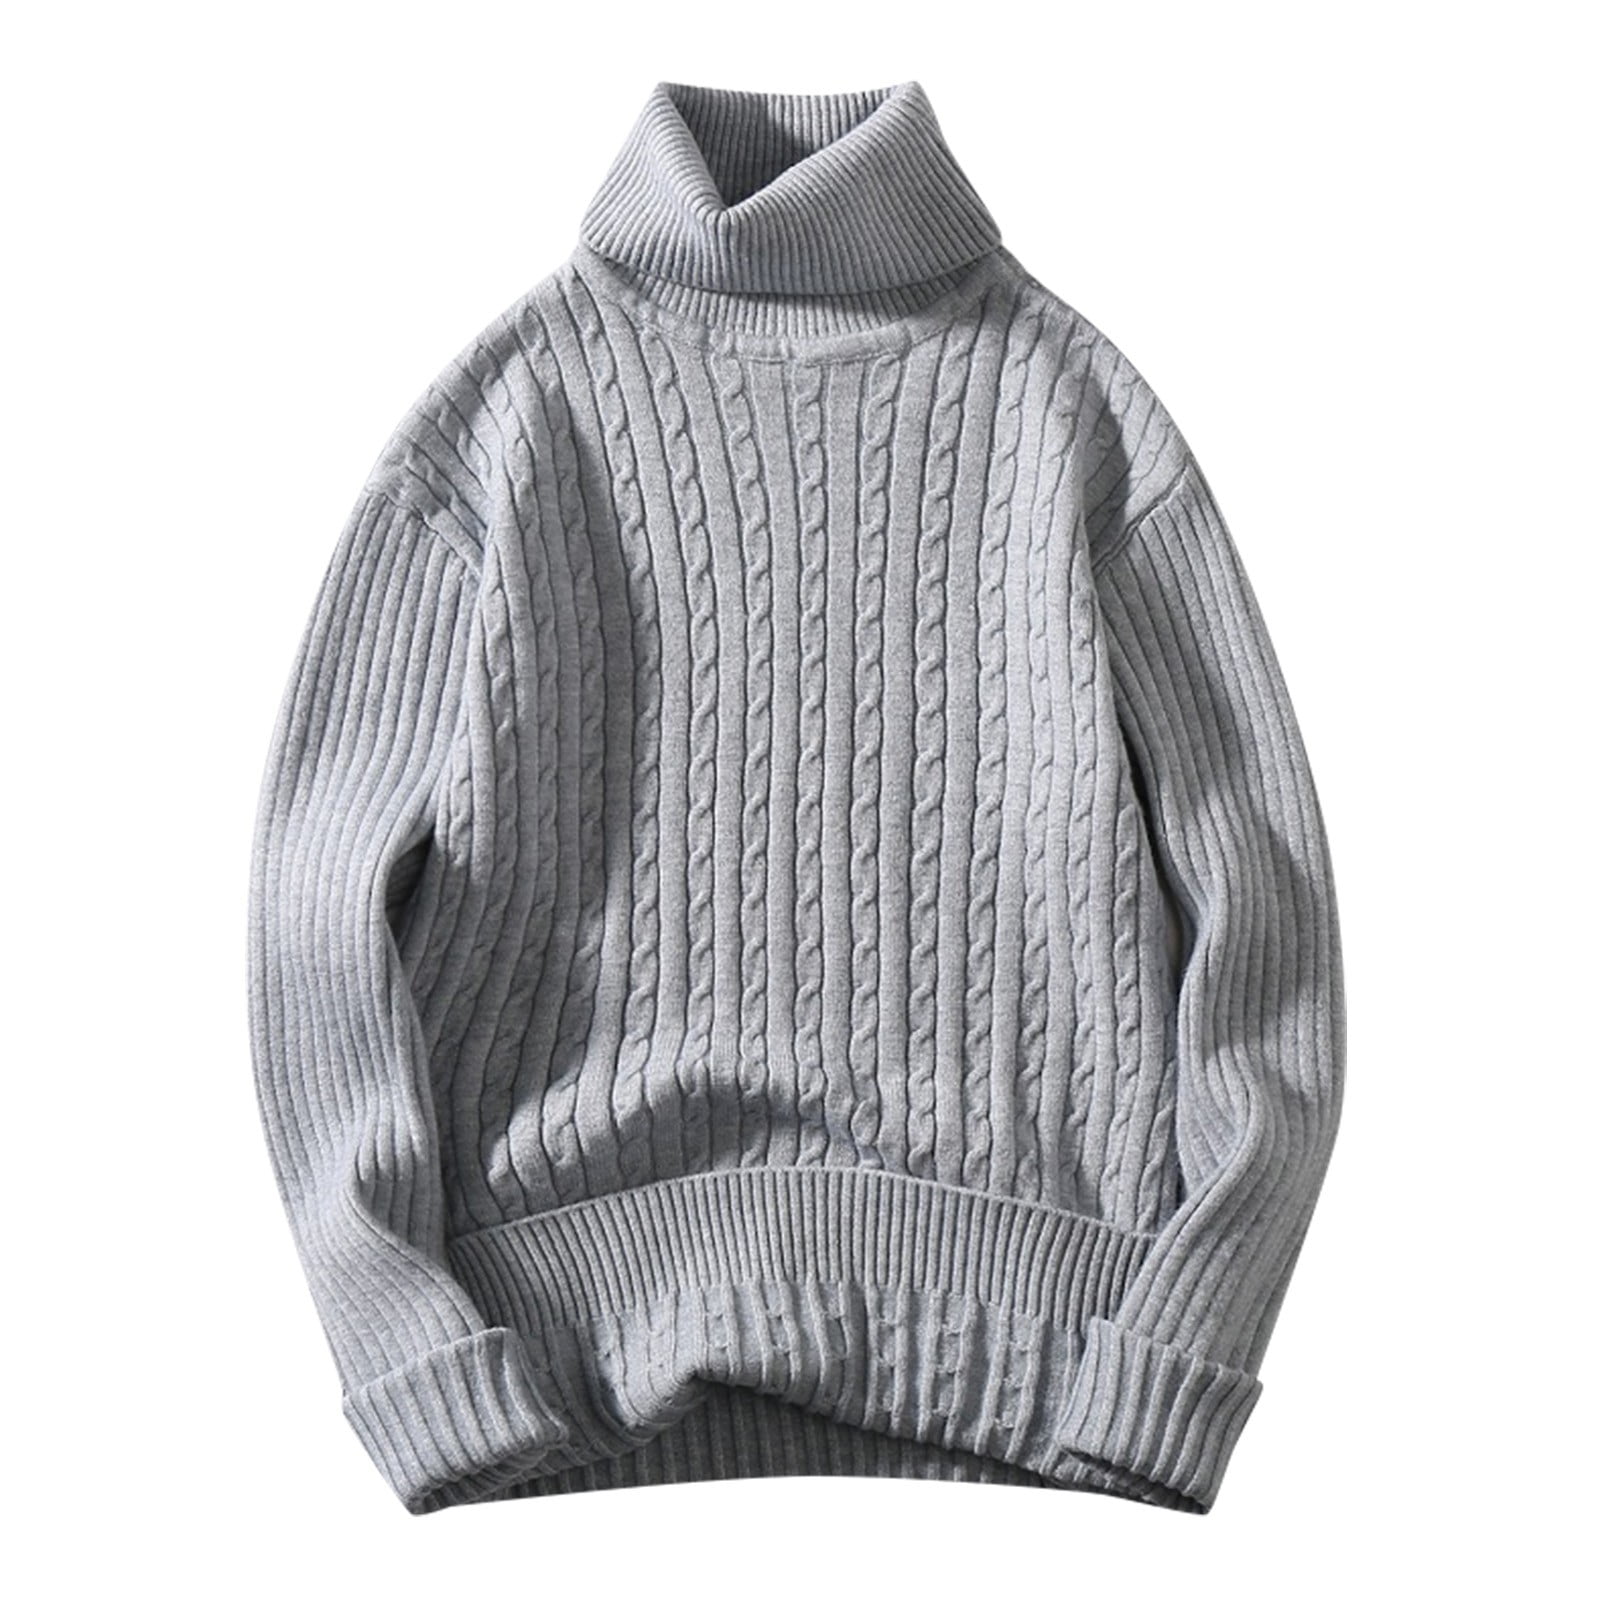 TOWED22 Men's Turtleneck Pullover Sweaters Male Autumn and Winter Wool ...